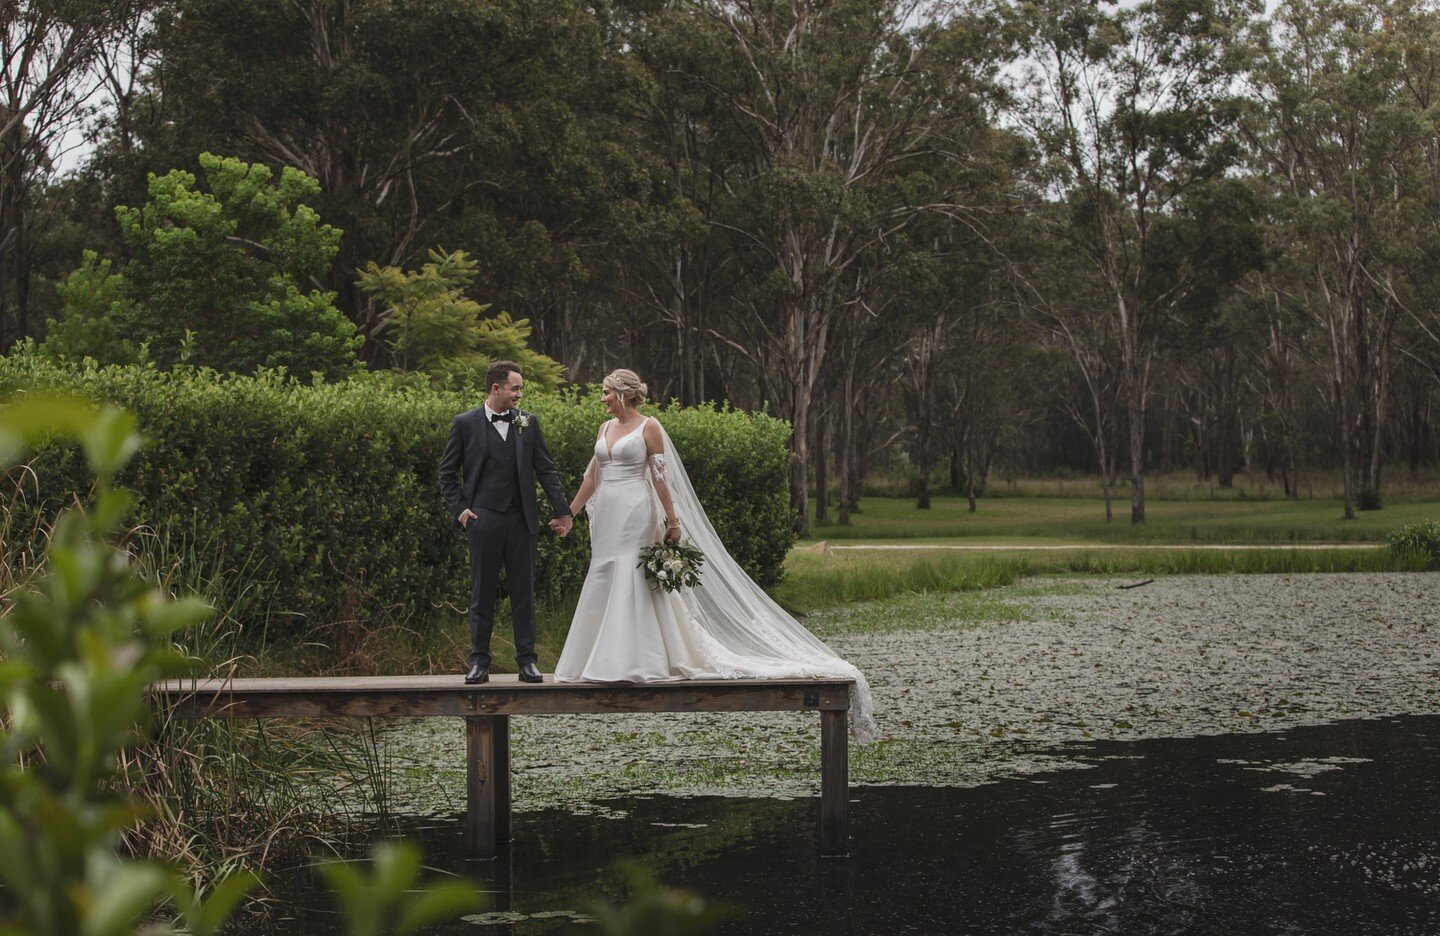 Sometimes, Love Is A Quiet Moment of Feeling

#huntervalleywedding
#huntervalleyweddingphotographer
#petersonhousewedding